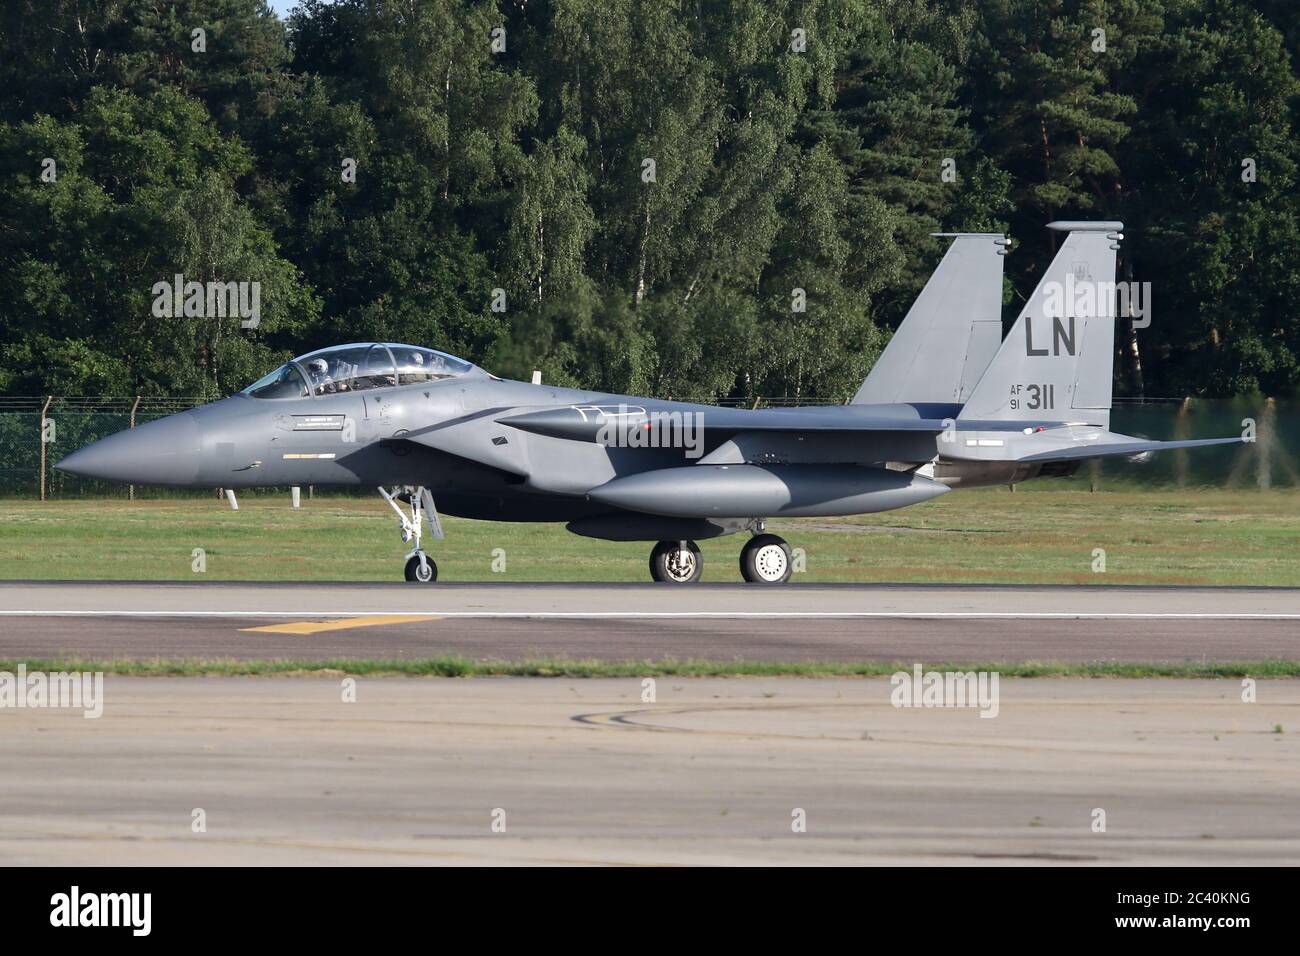 An 48th FW F-15E returning to Lakenheath from an overhaul in the US. The nose carries a dedication to the 48th FW pilot who recently died in a crash. Stock Photo